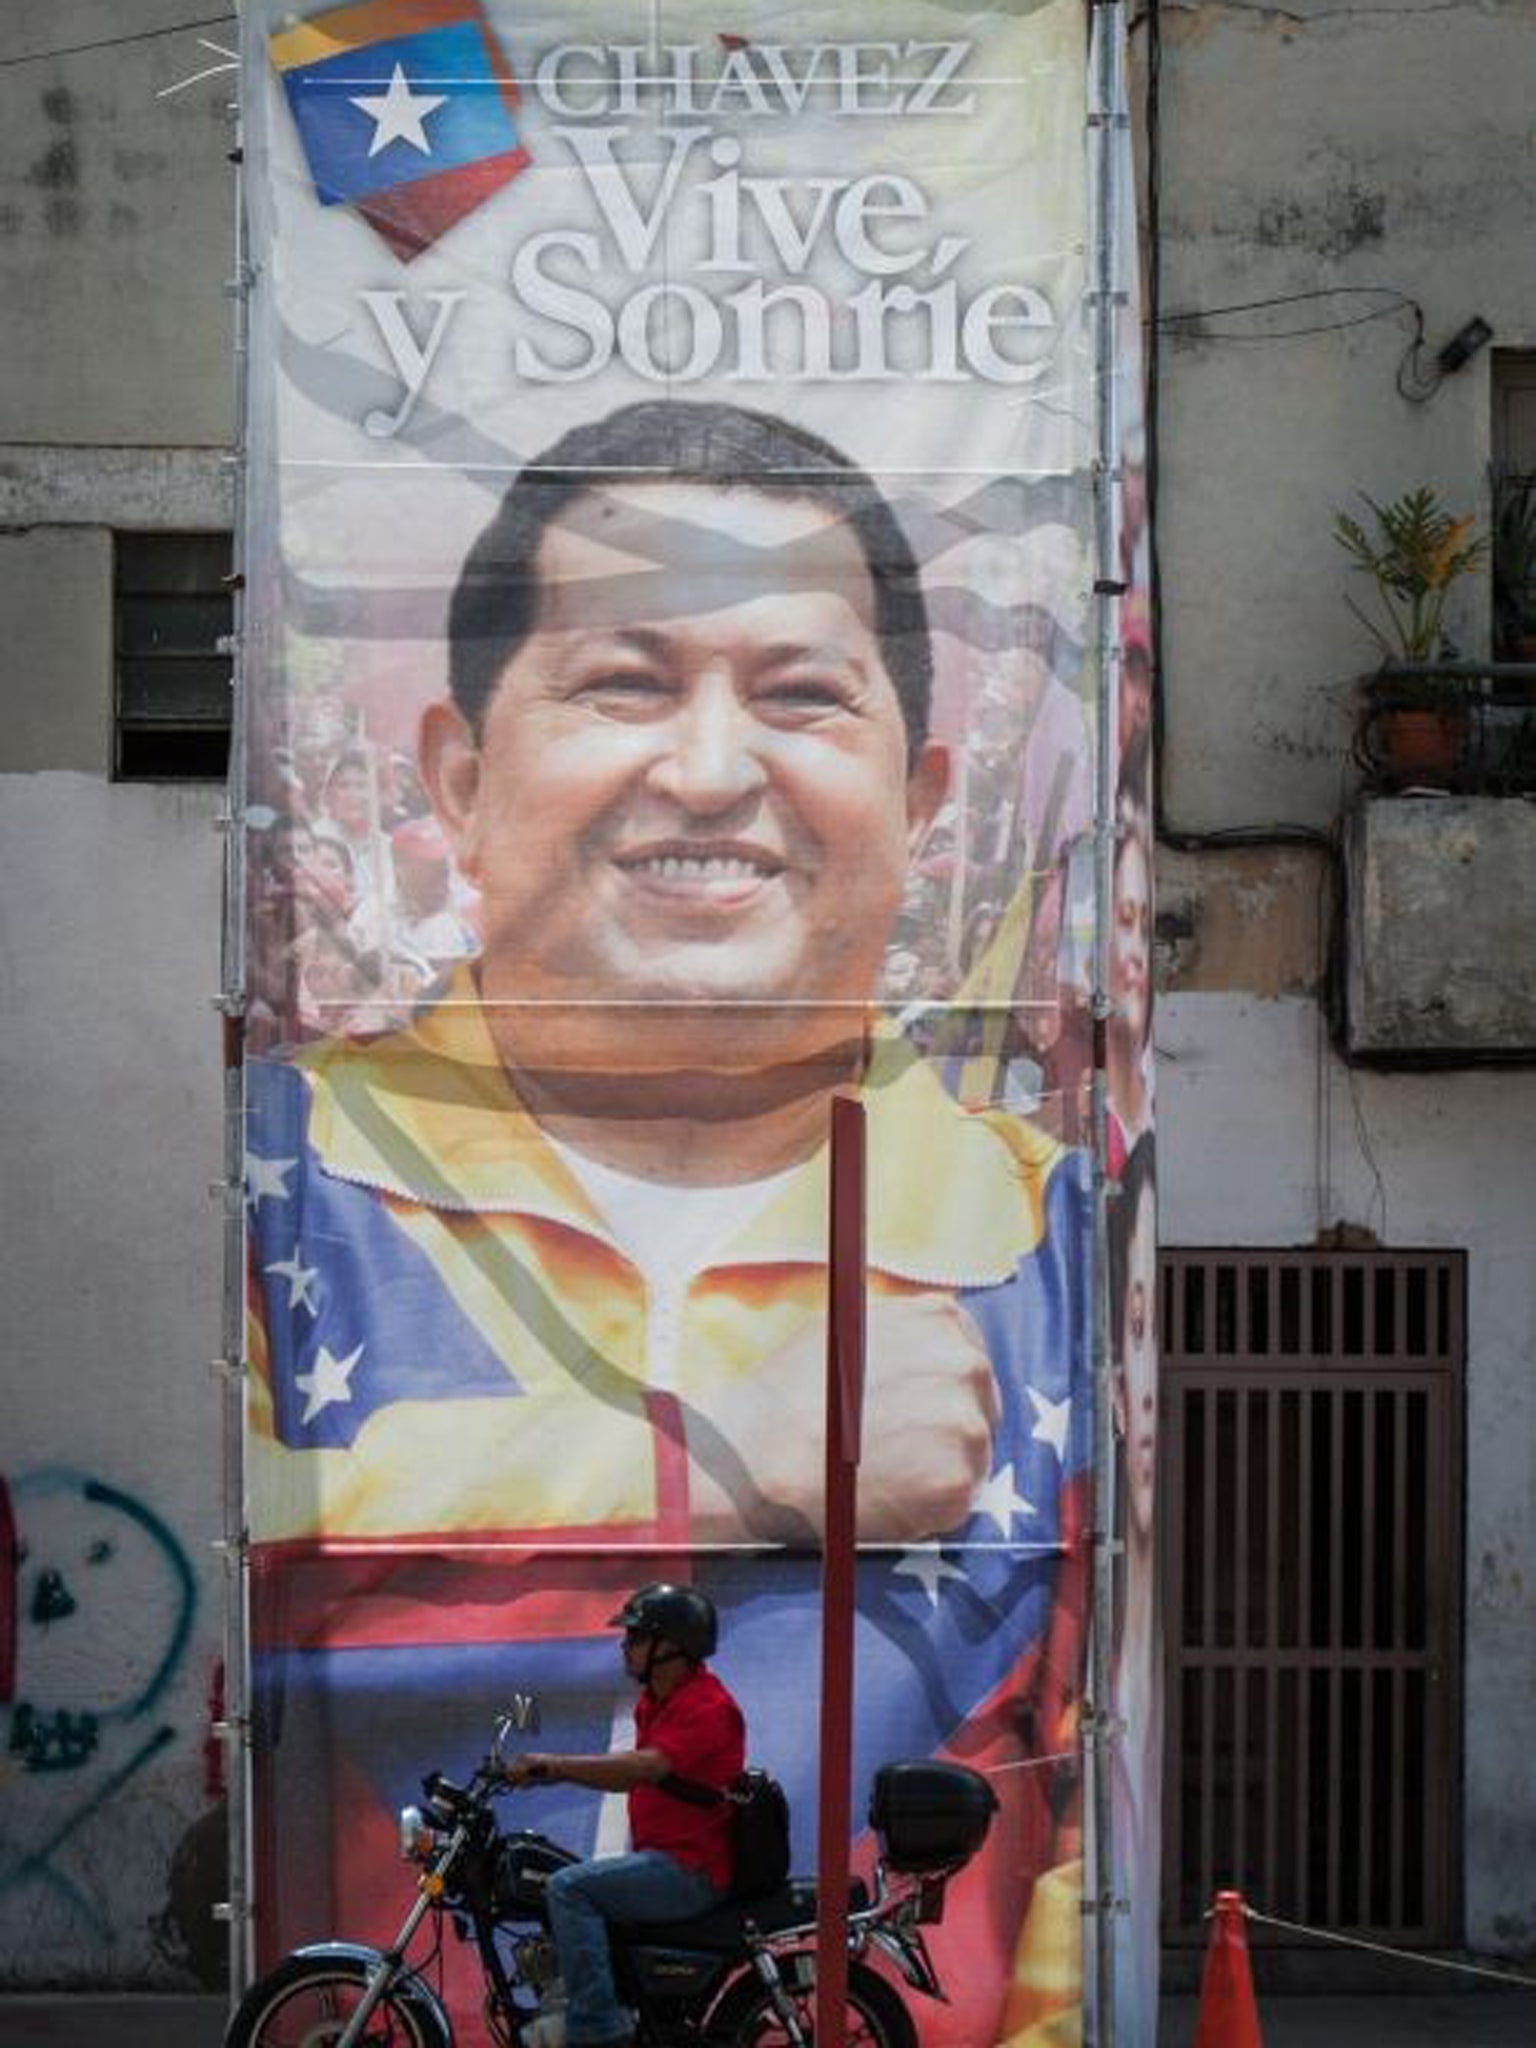 A billboard outside the military hospital in Caracas where Chavez is being treated